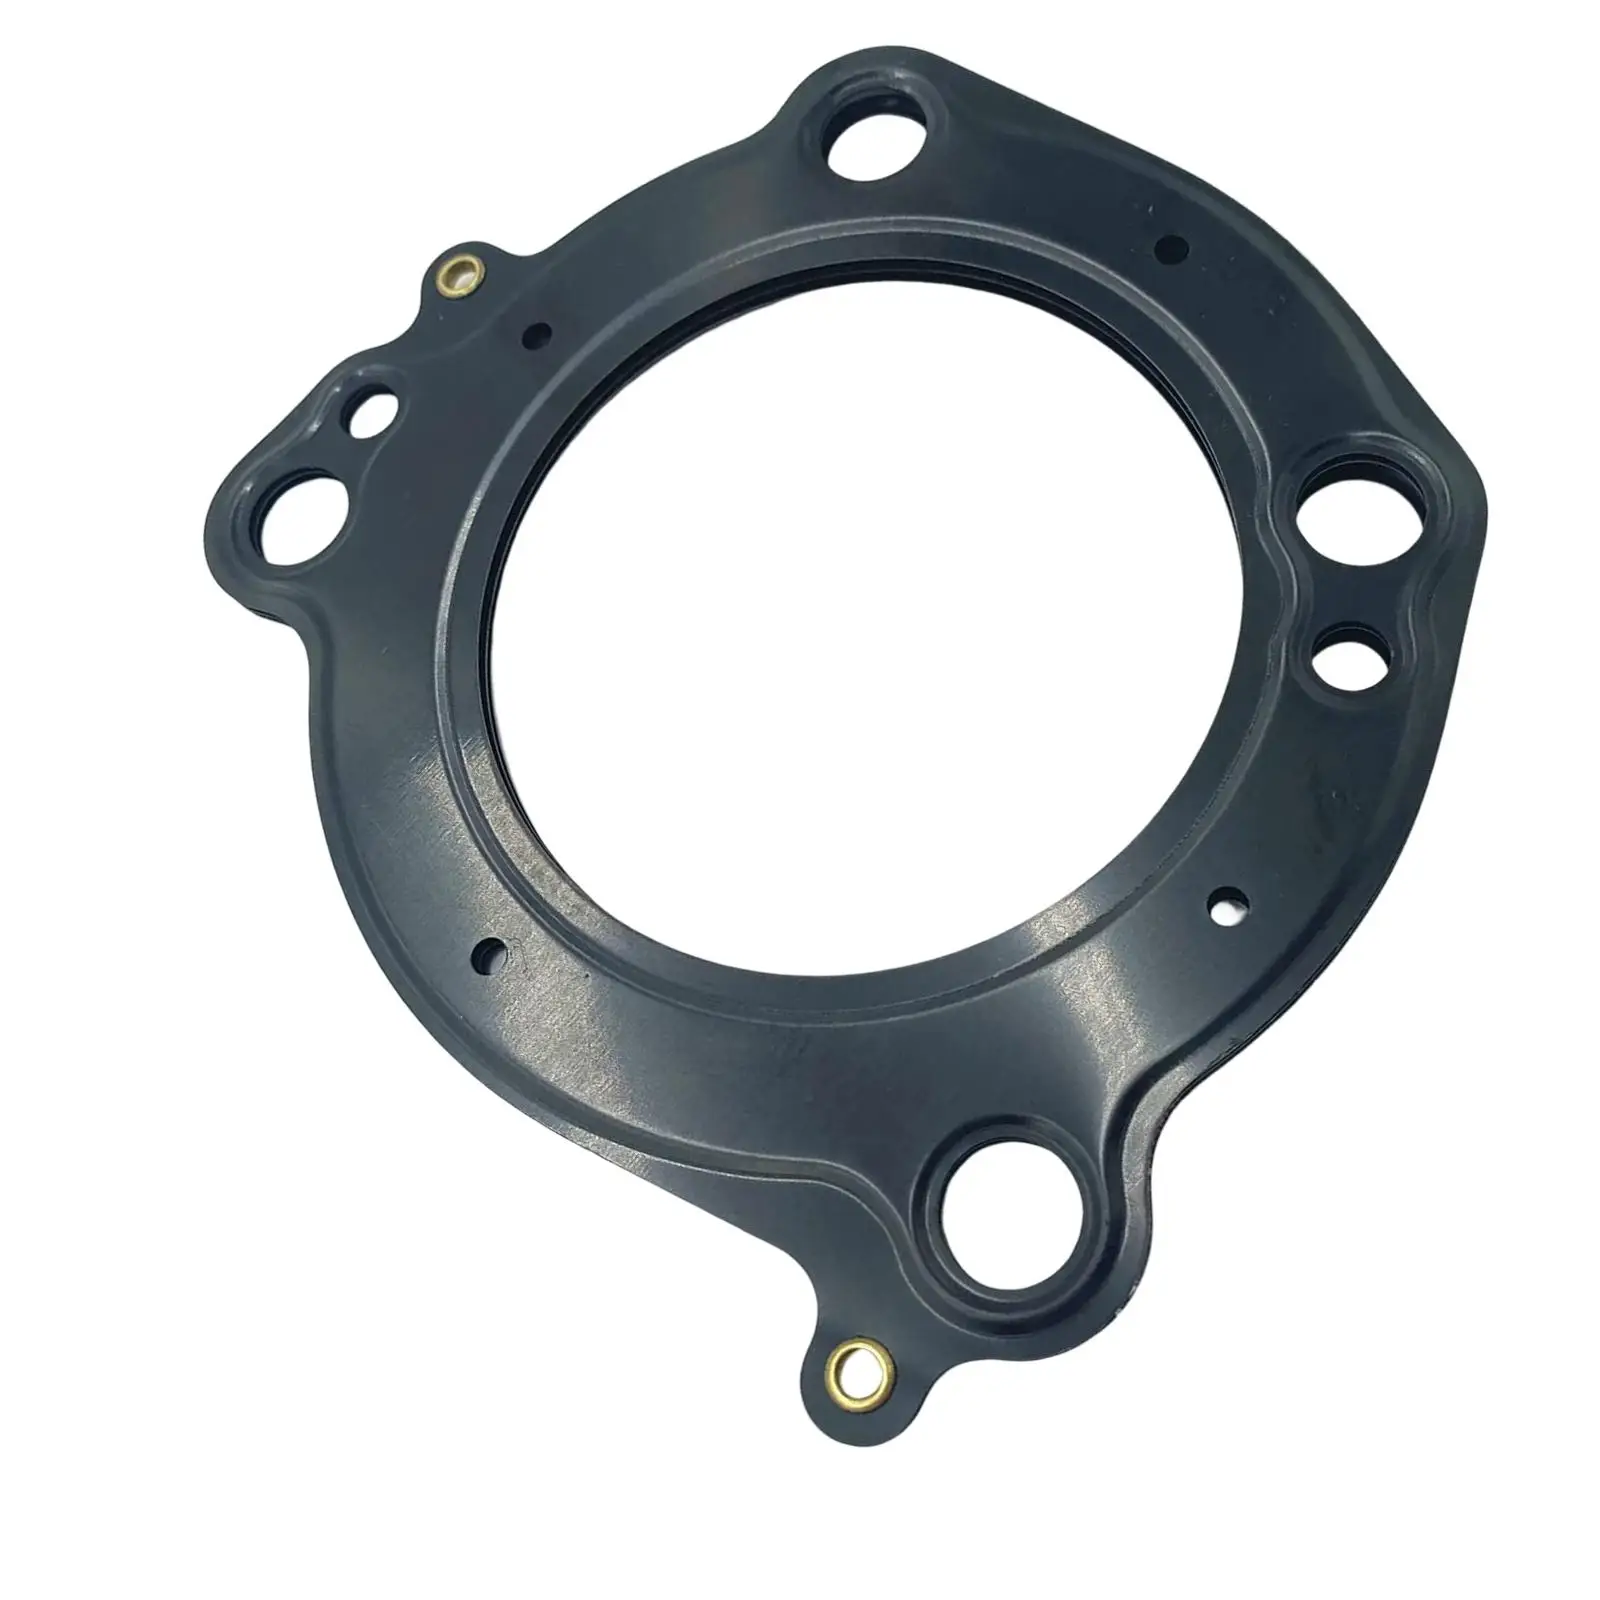 Muffler Gasket Damper 66V-14739-00-00 007-595-01 for 1200 1300 Accessory Direct Replaces Professional Supplies